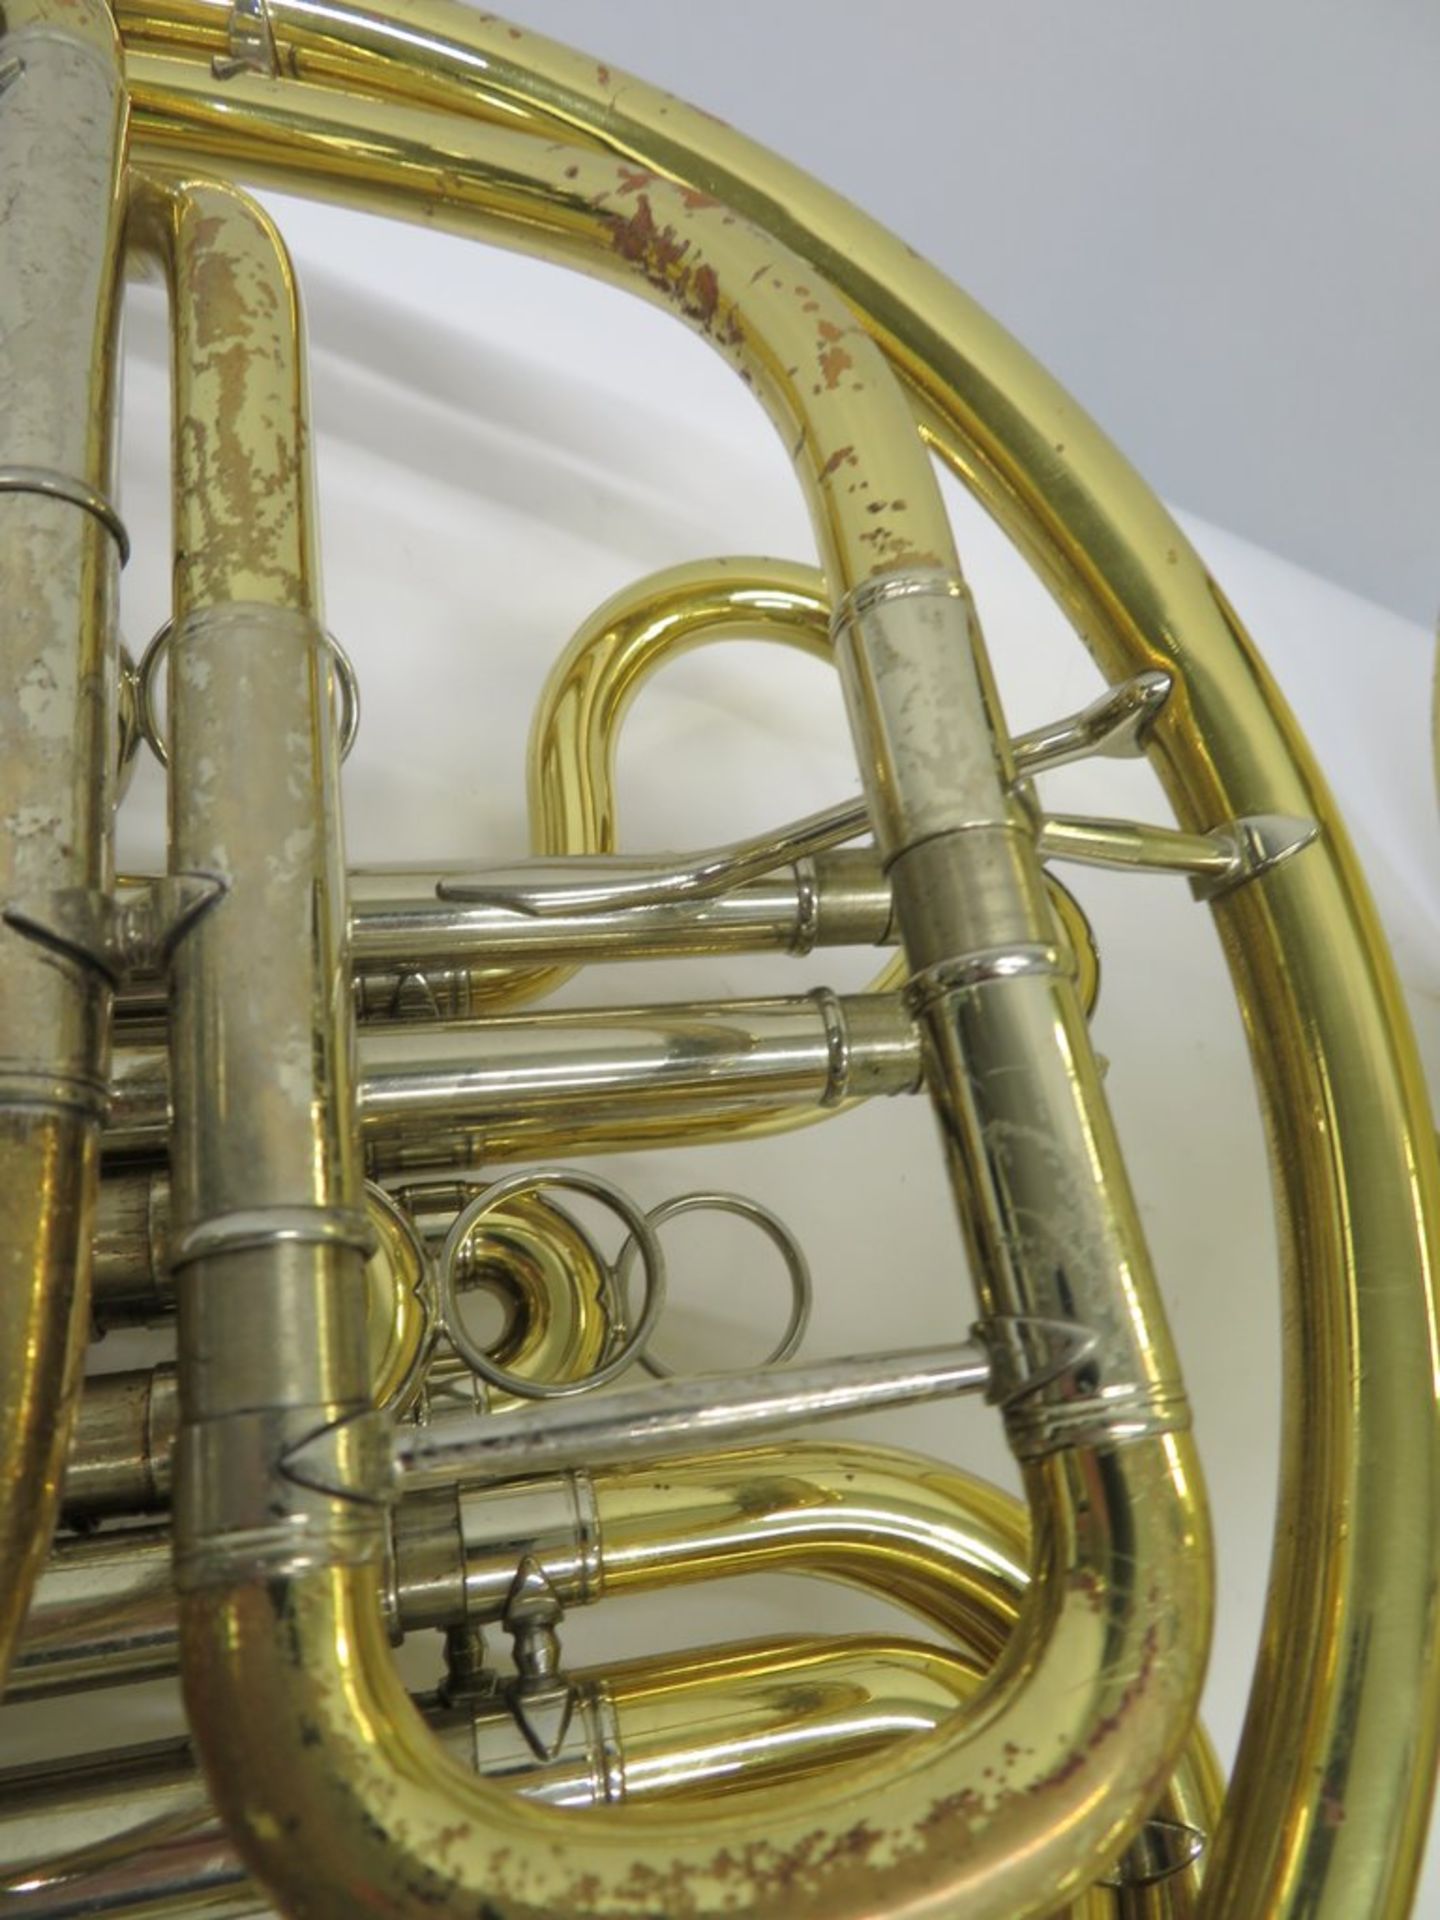 Yamaha YHR 668 French Horn Complete With Case. - Image 17 of 21